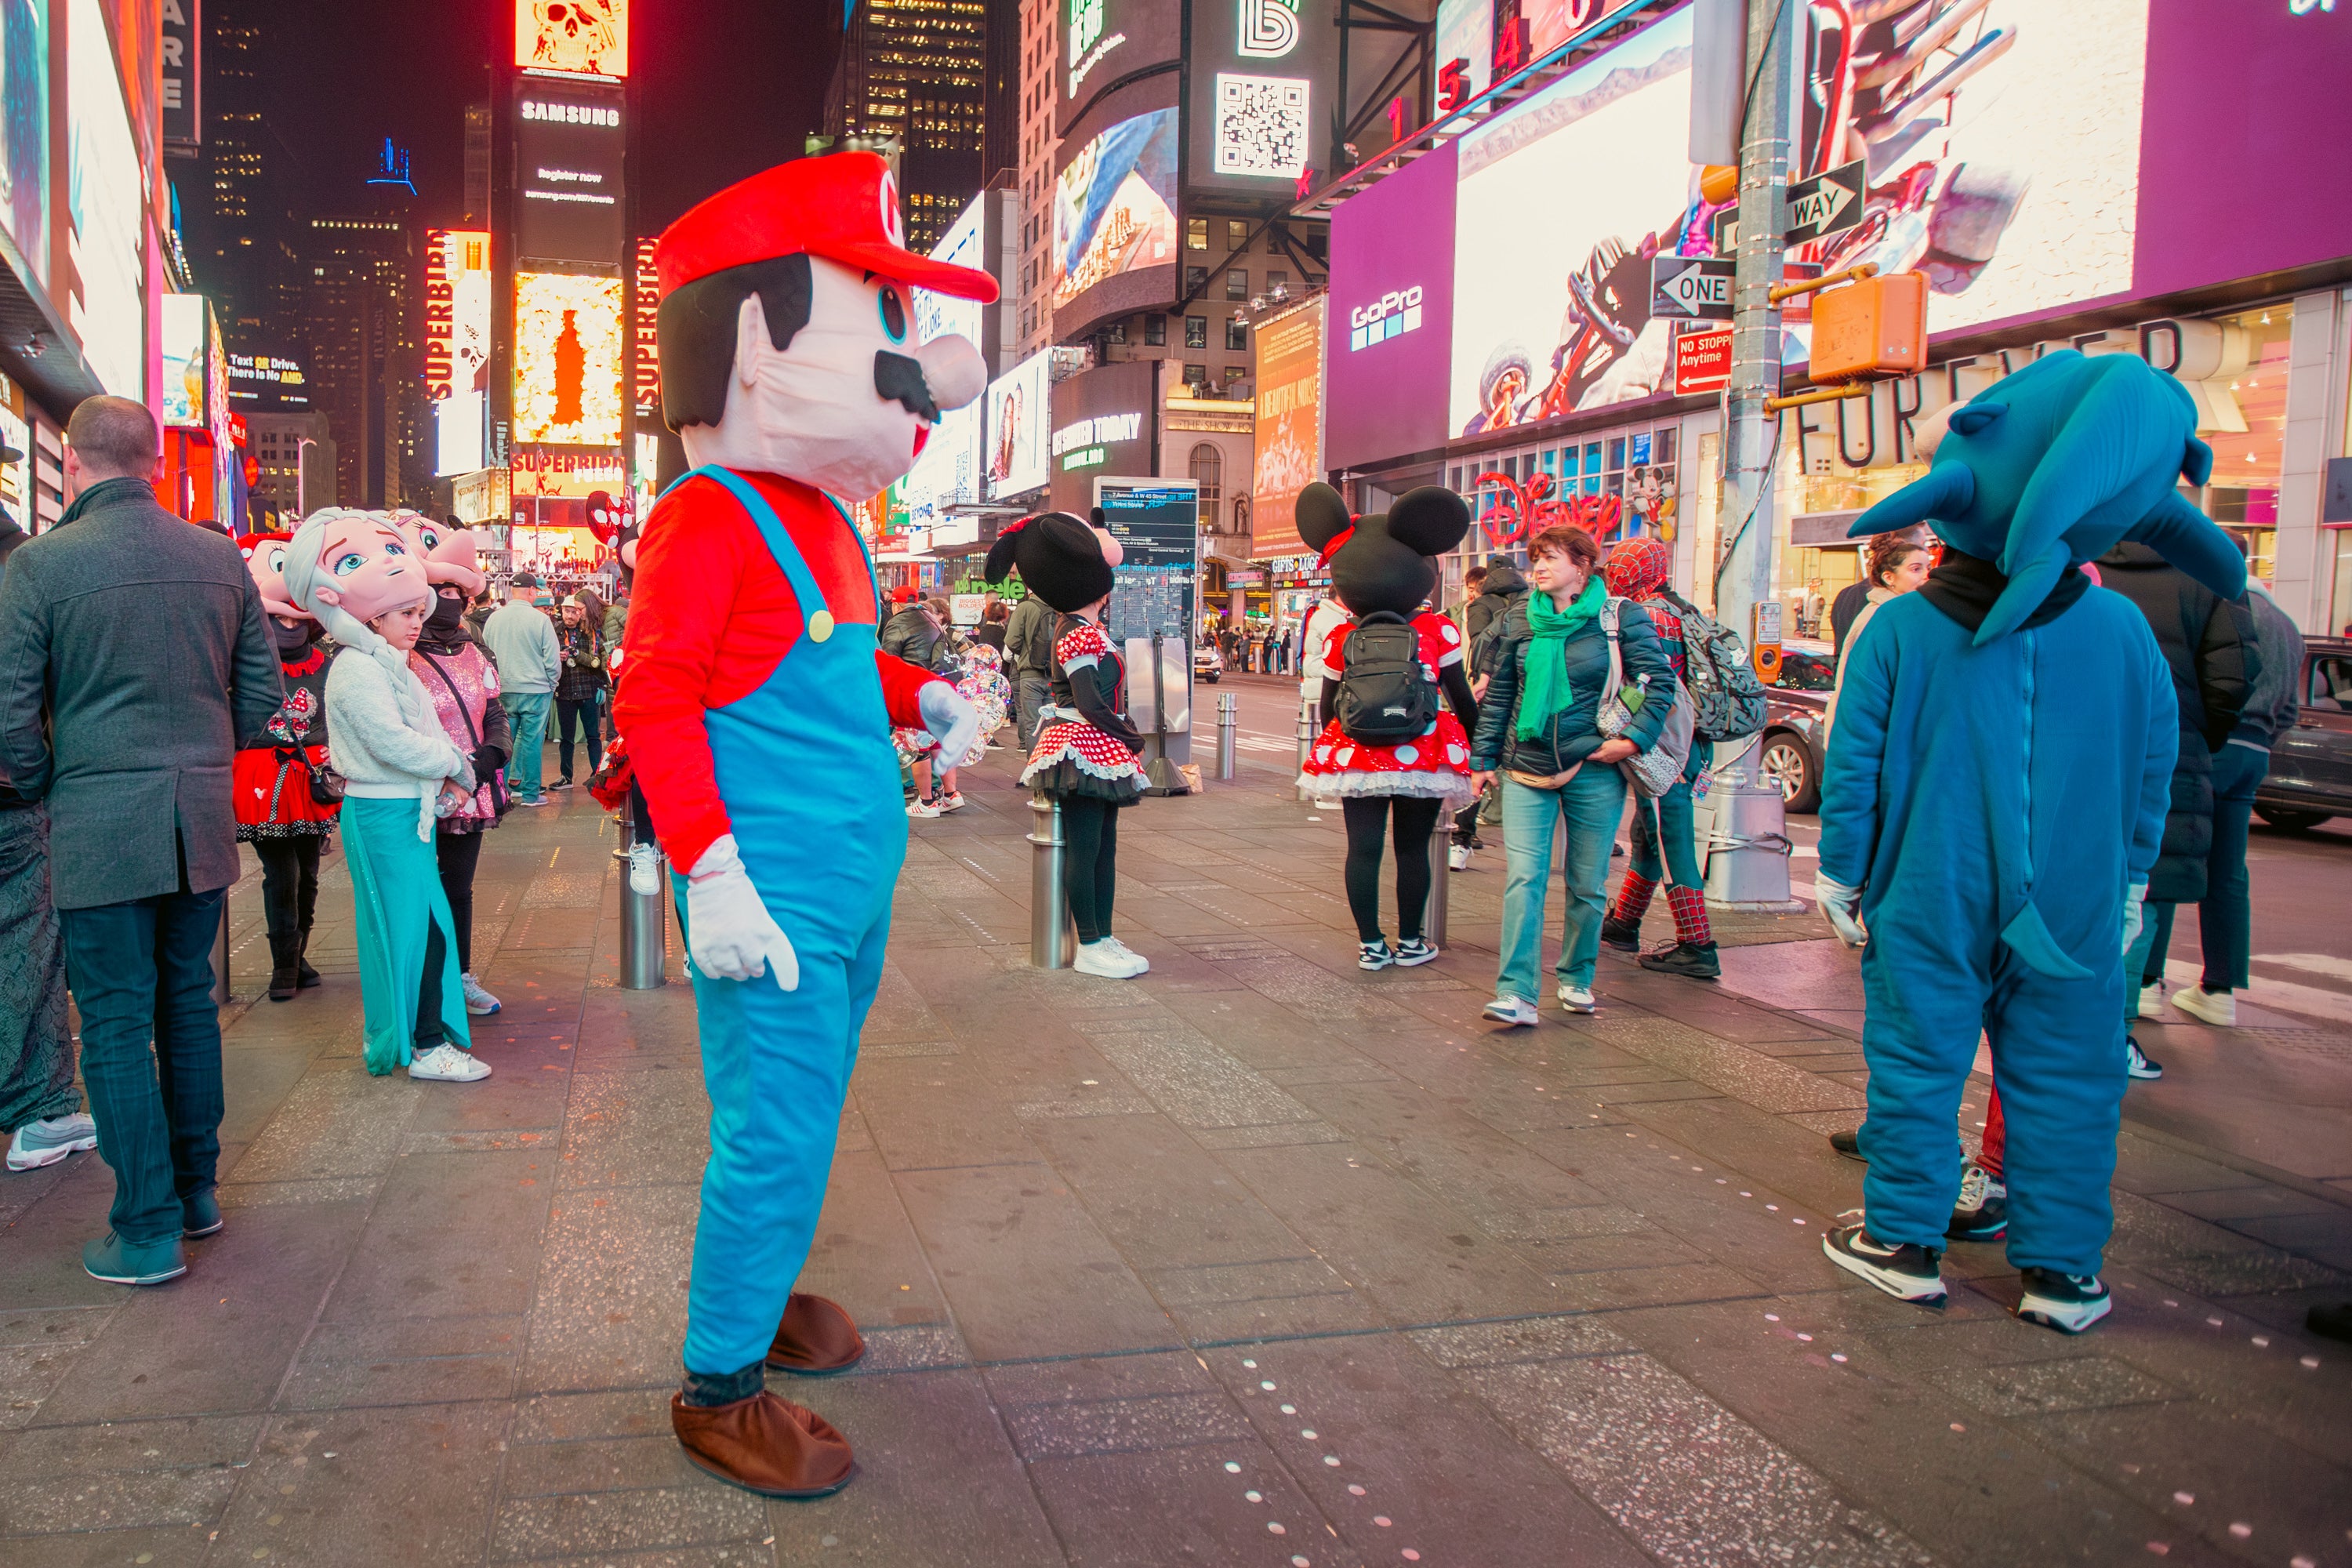 Luke, in the Mario costume, in Times Square and glancing at passersby.